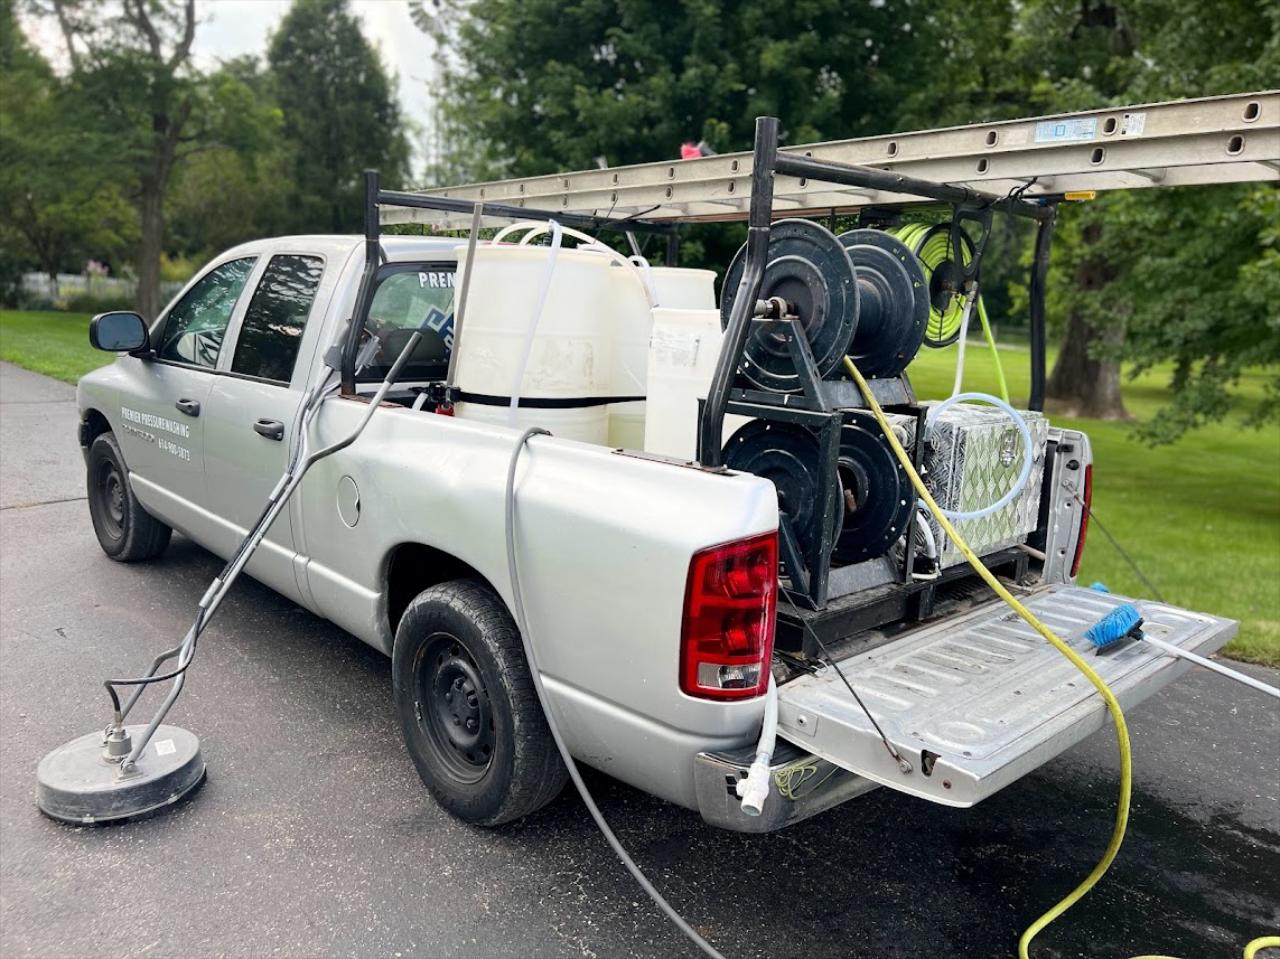 Welcome to Premier Pressure Washing &amp; Property Maintenance &ndash; your trusted source for quality pressure and power washing services in Springfield, Dayton, and Columbus Ohio areas&nbsp;